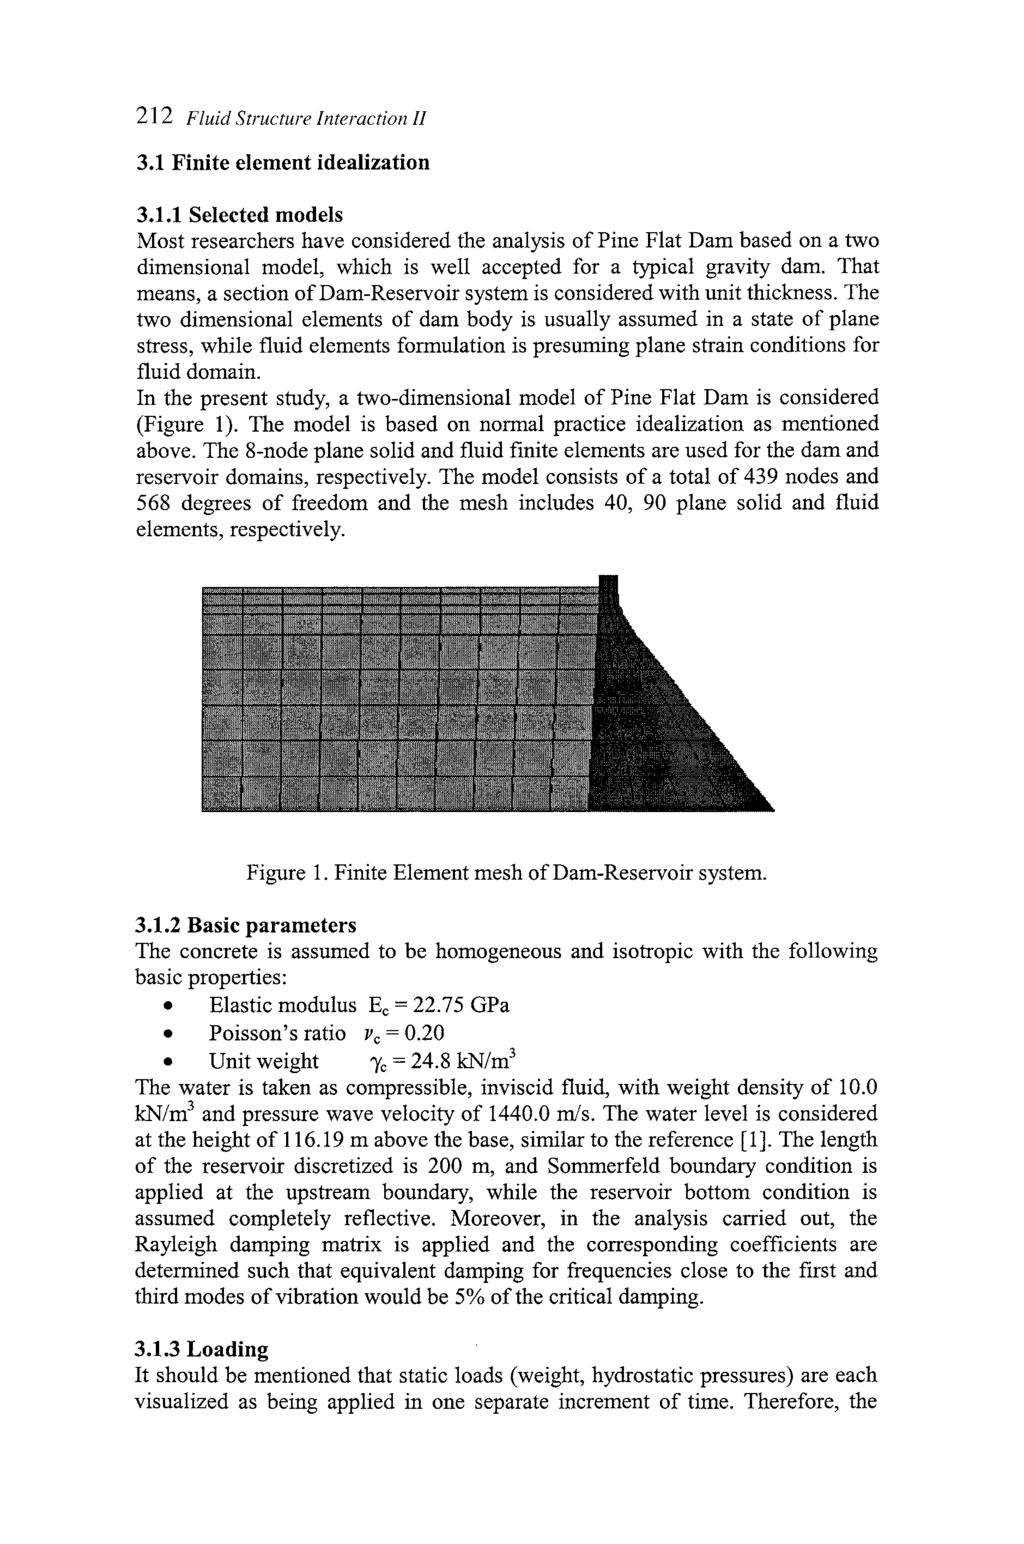 21 2 Fluid Structure Interaction 11 3.1 Finite element idealization 3.1.1 Selected models Most researchers have considered the analysis of Pine Flat Dam based on a two dimensional model, which is well accepted for a typical gravity dam.